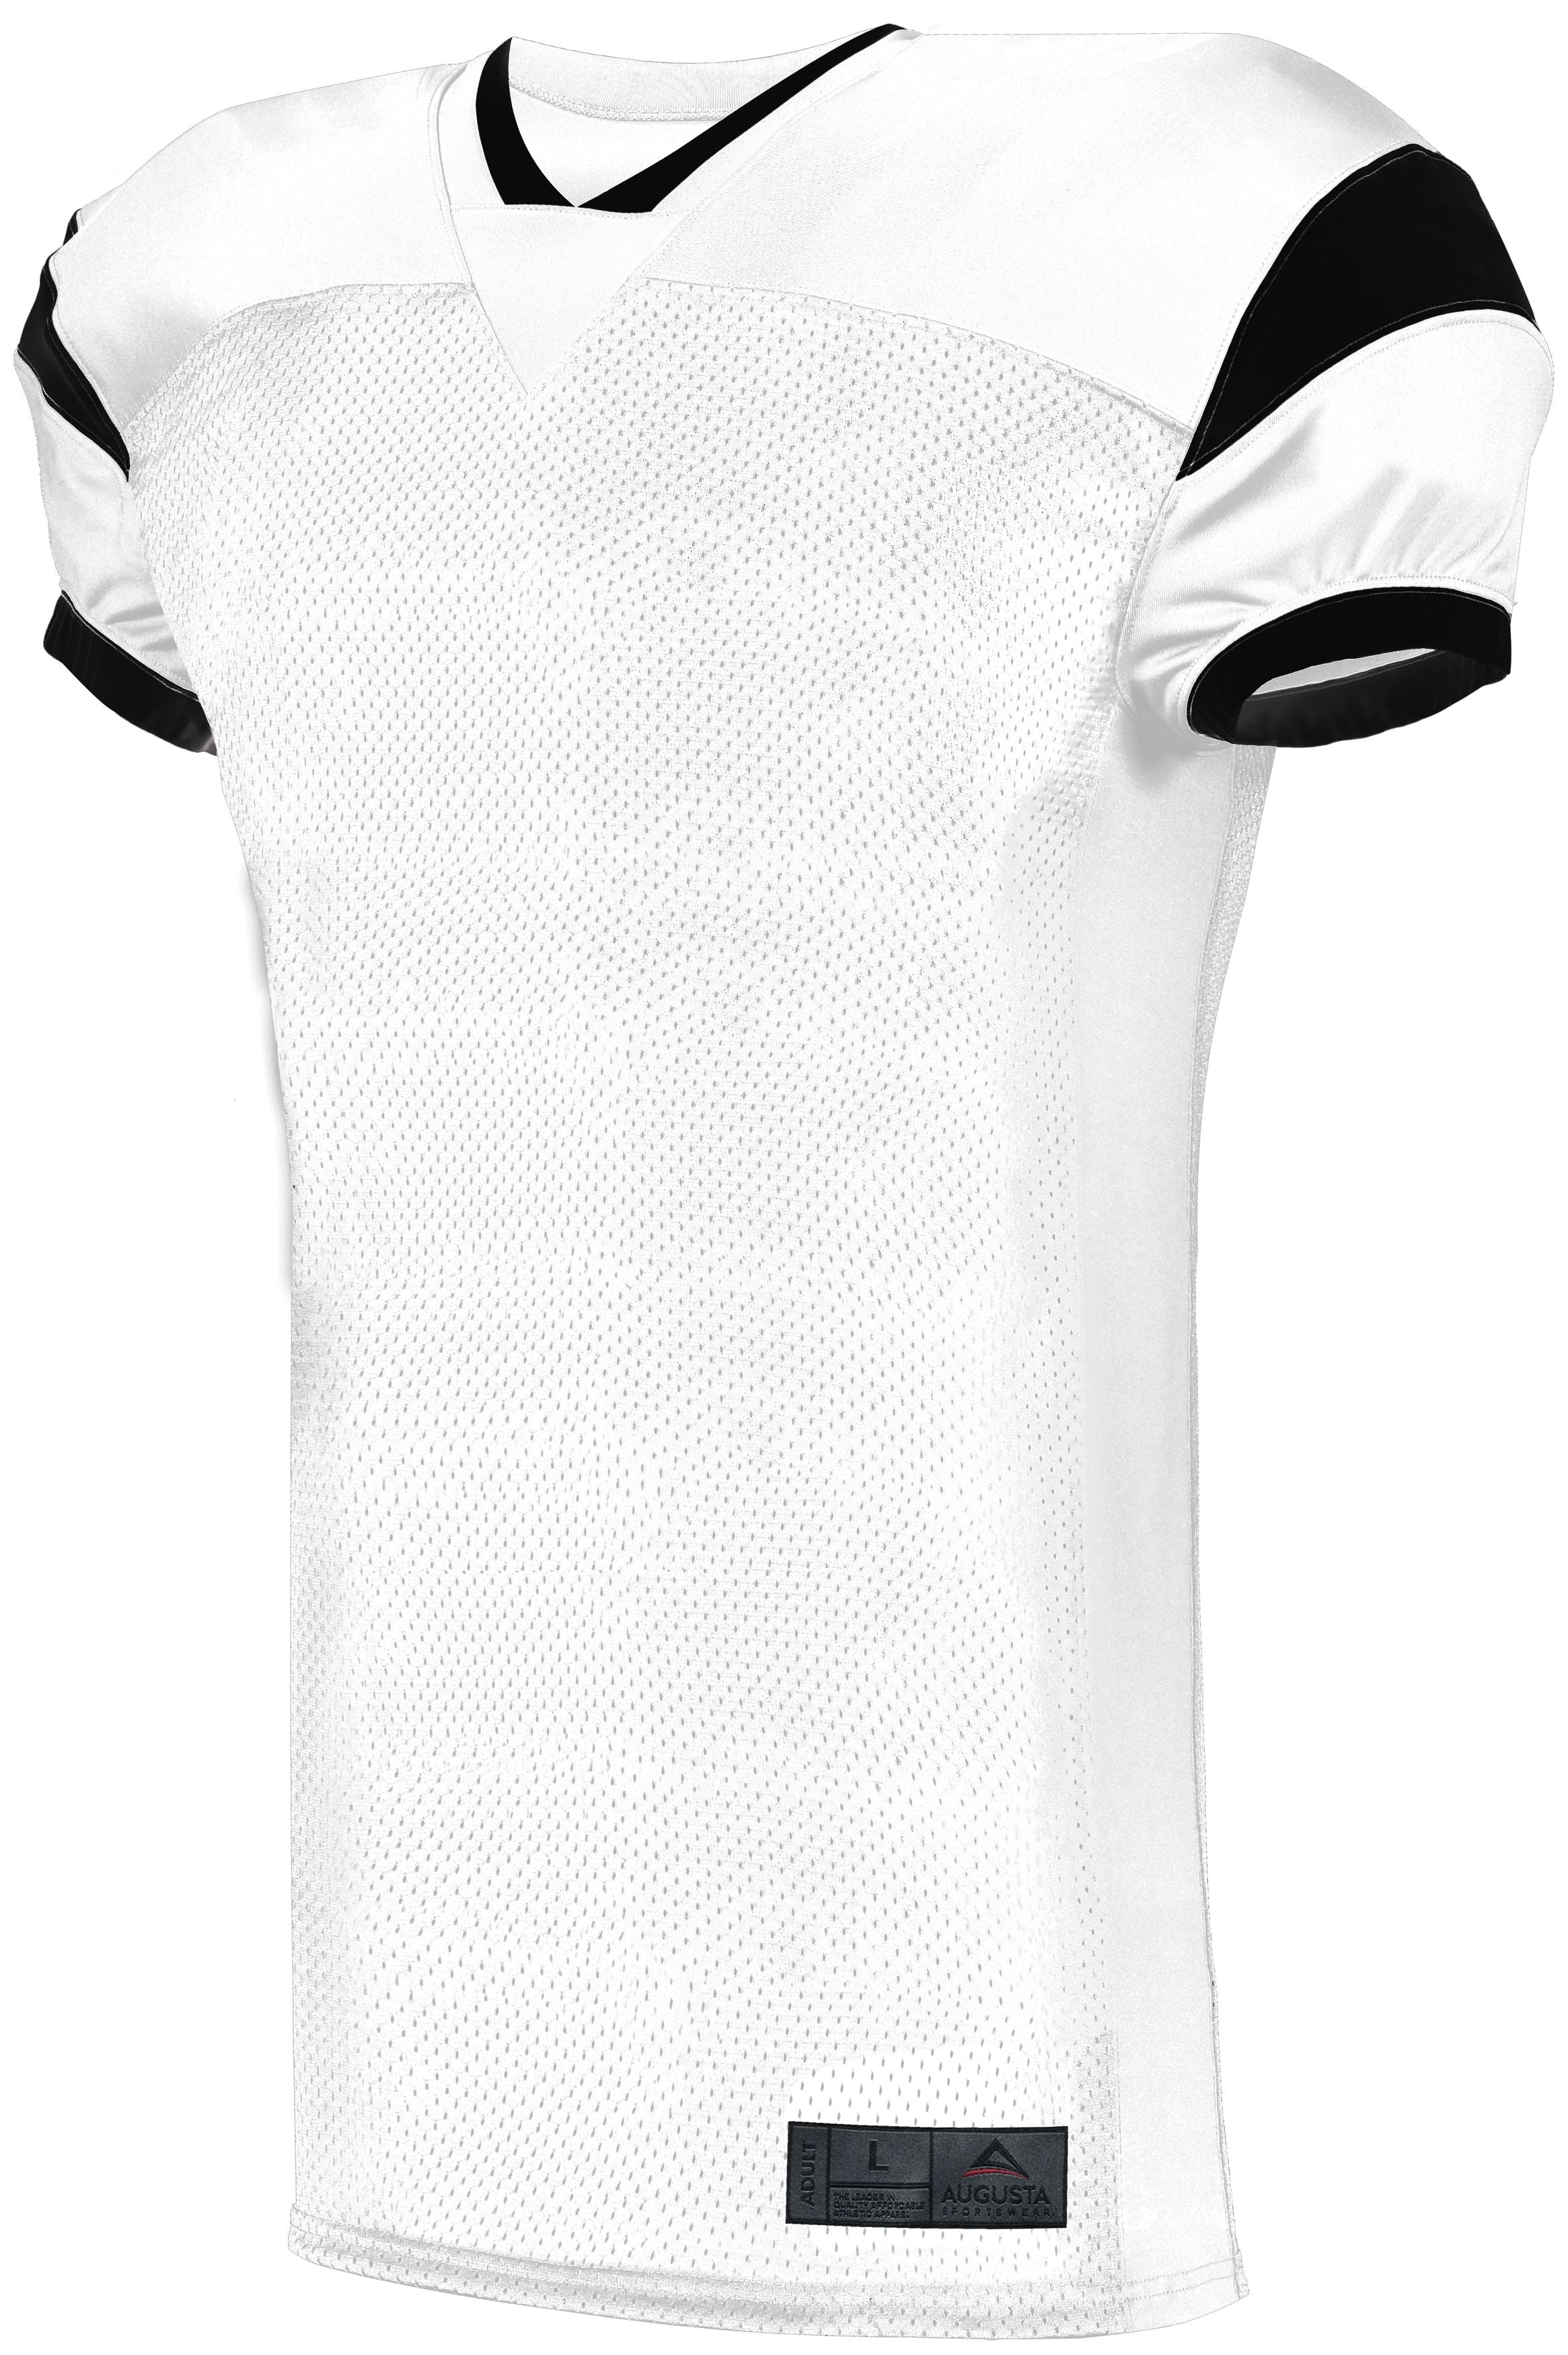 Augusta Sportswear Slant Football Jersey in White/Black  -Part of the Adult, Adult-Jersey, Augusta-Products, Football, Shirts, All-Sports, All-Sports-1 product lines at KanaleyCreations.com